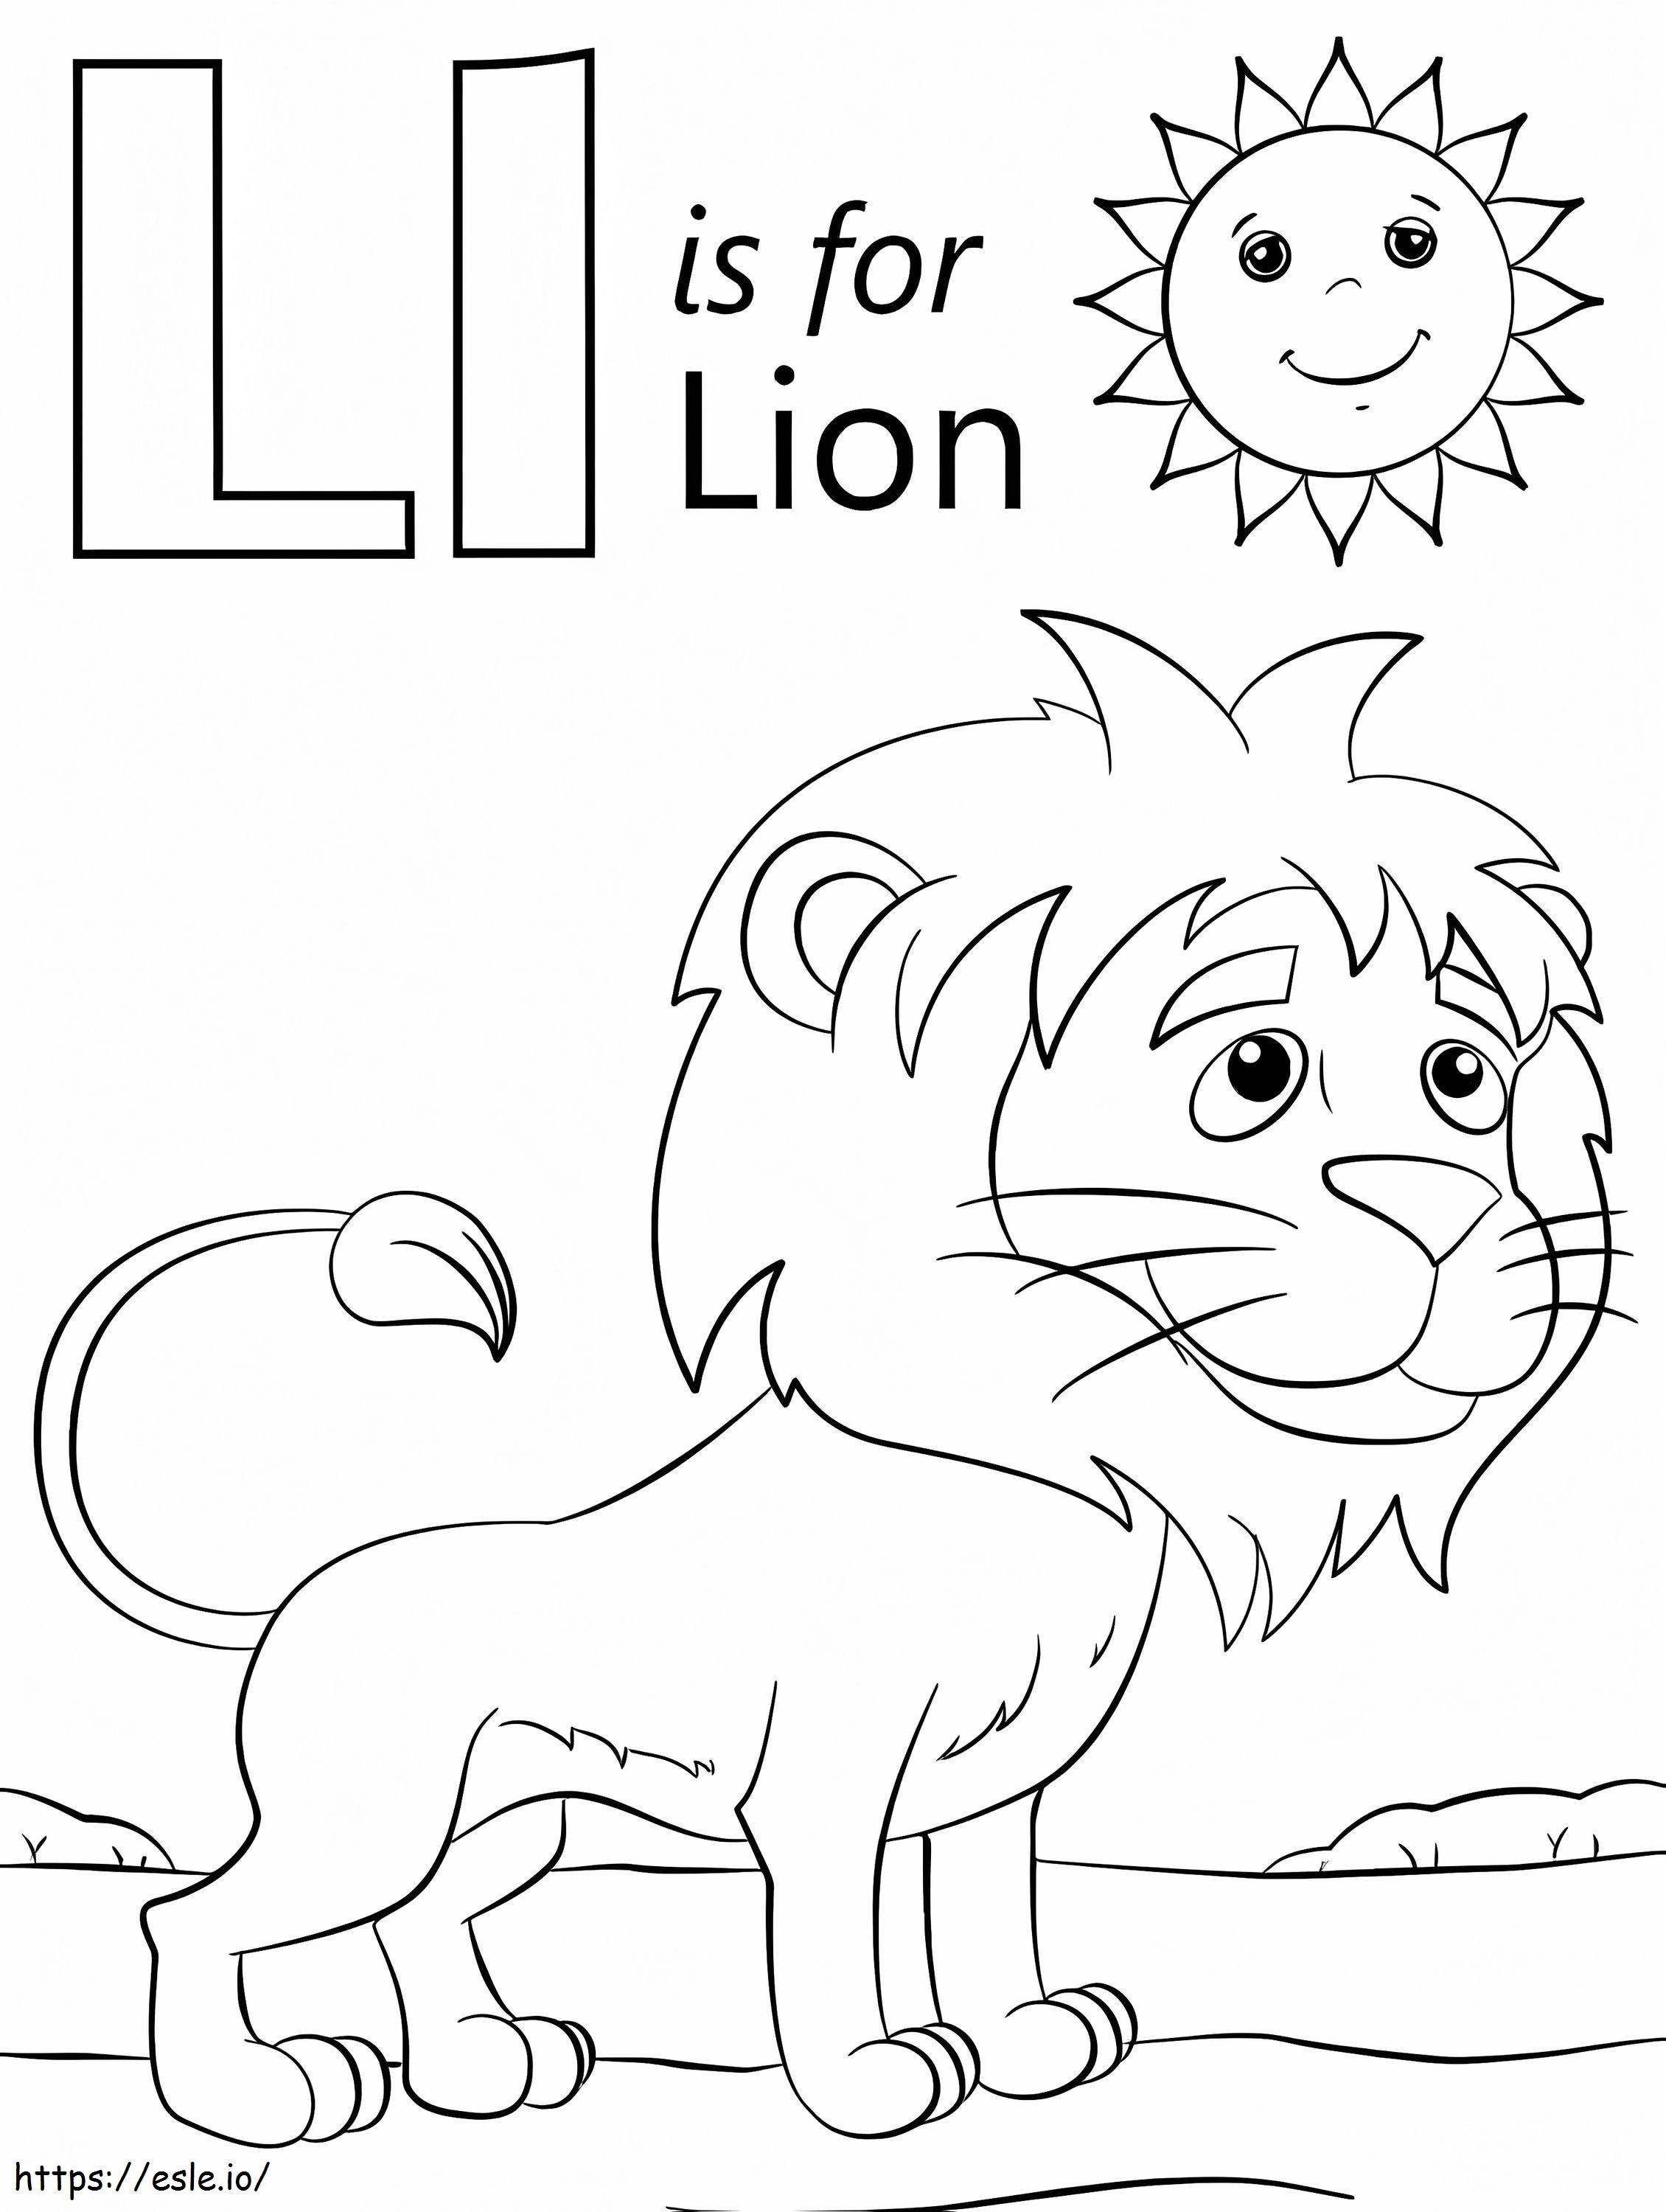 Leon Letra L With Sol coloring page